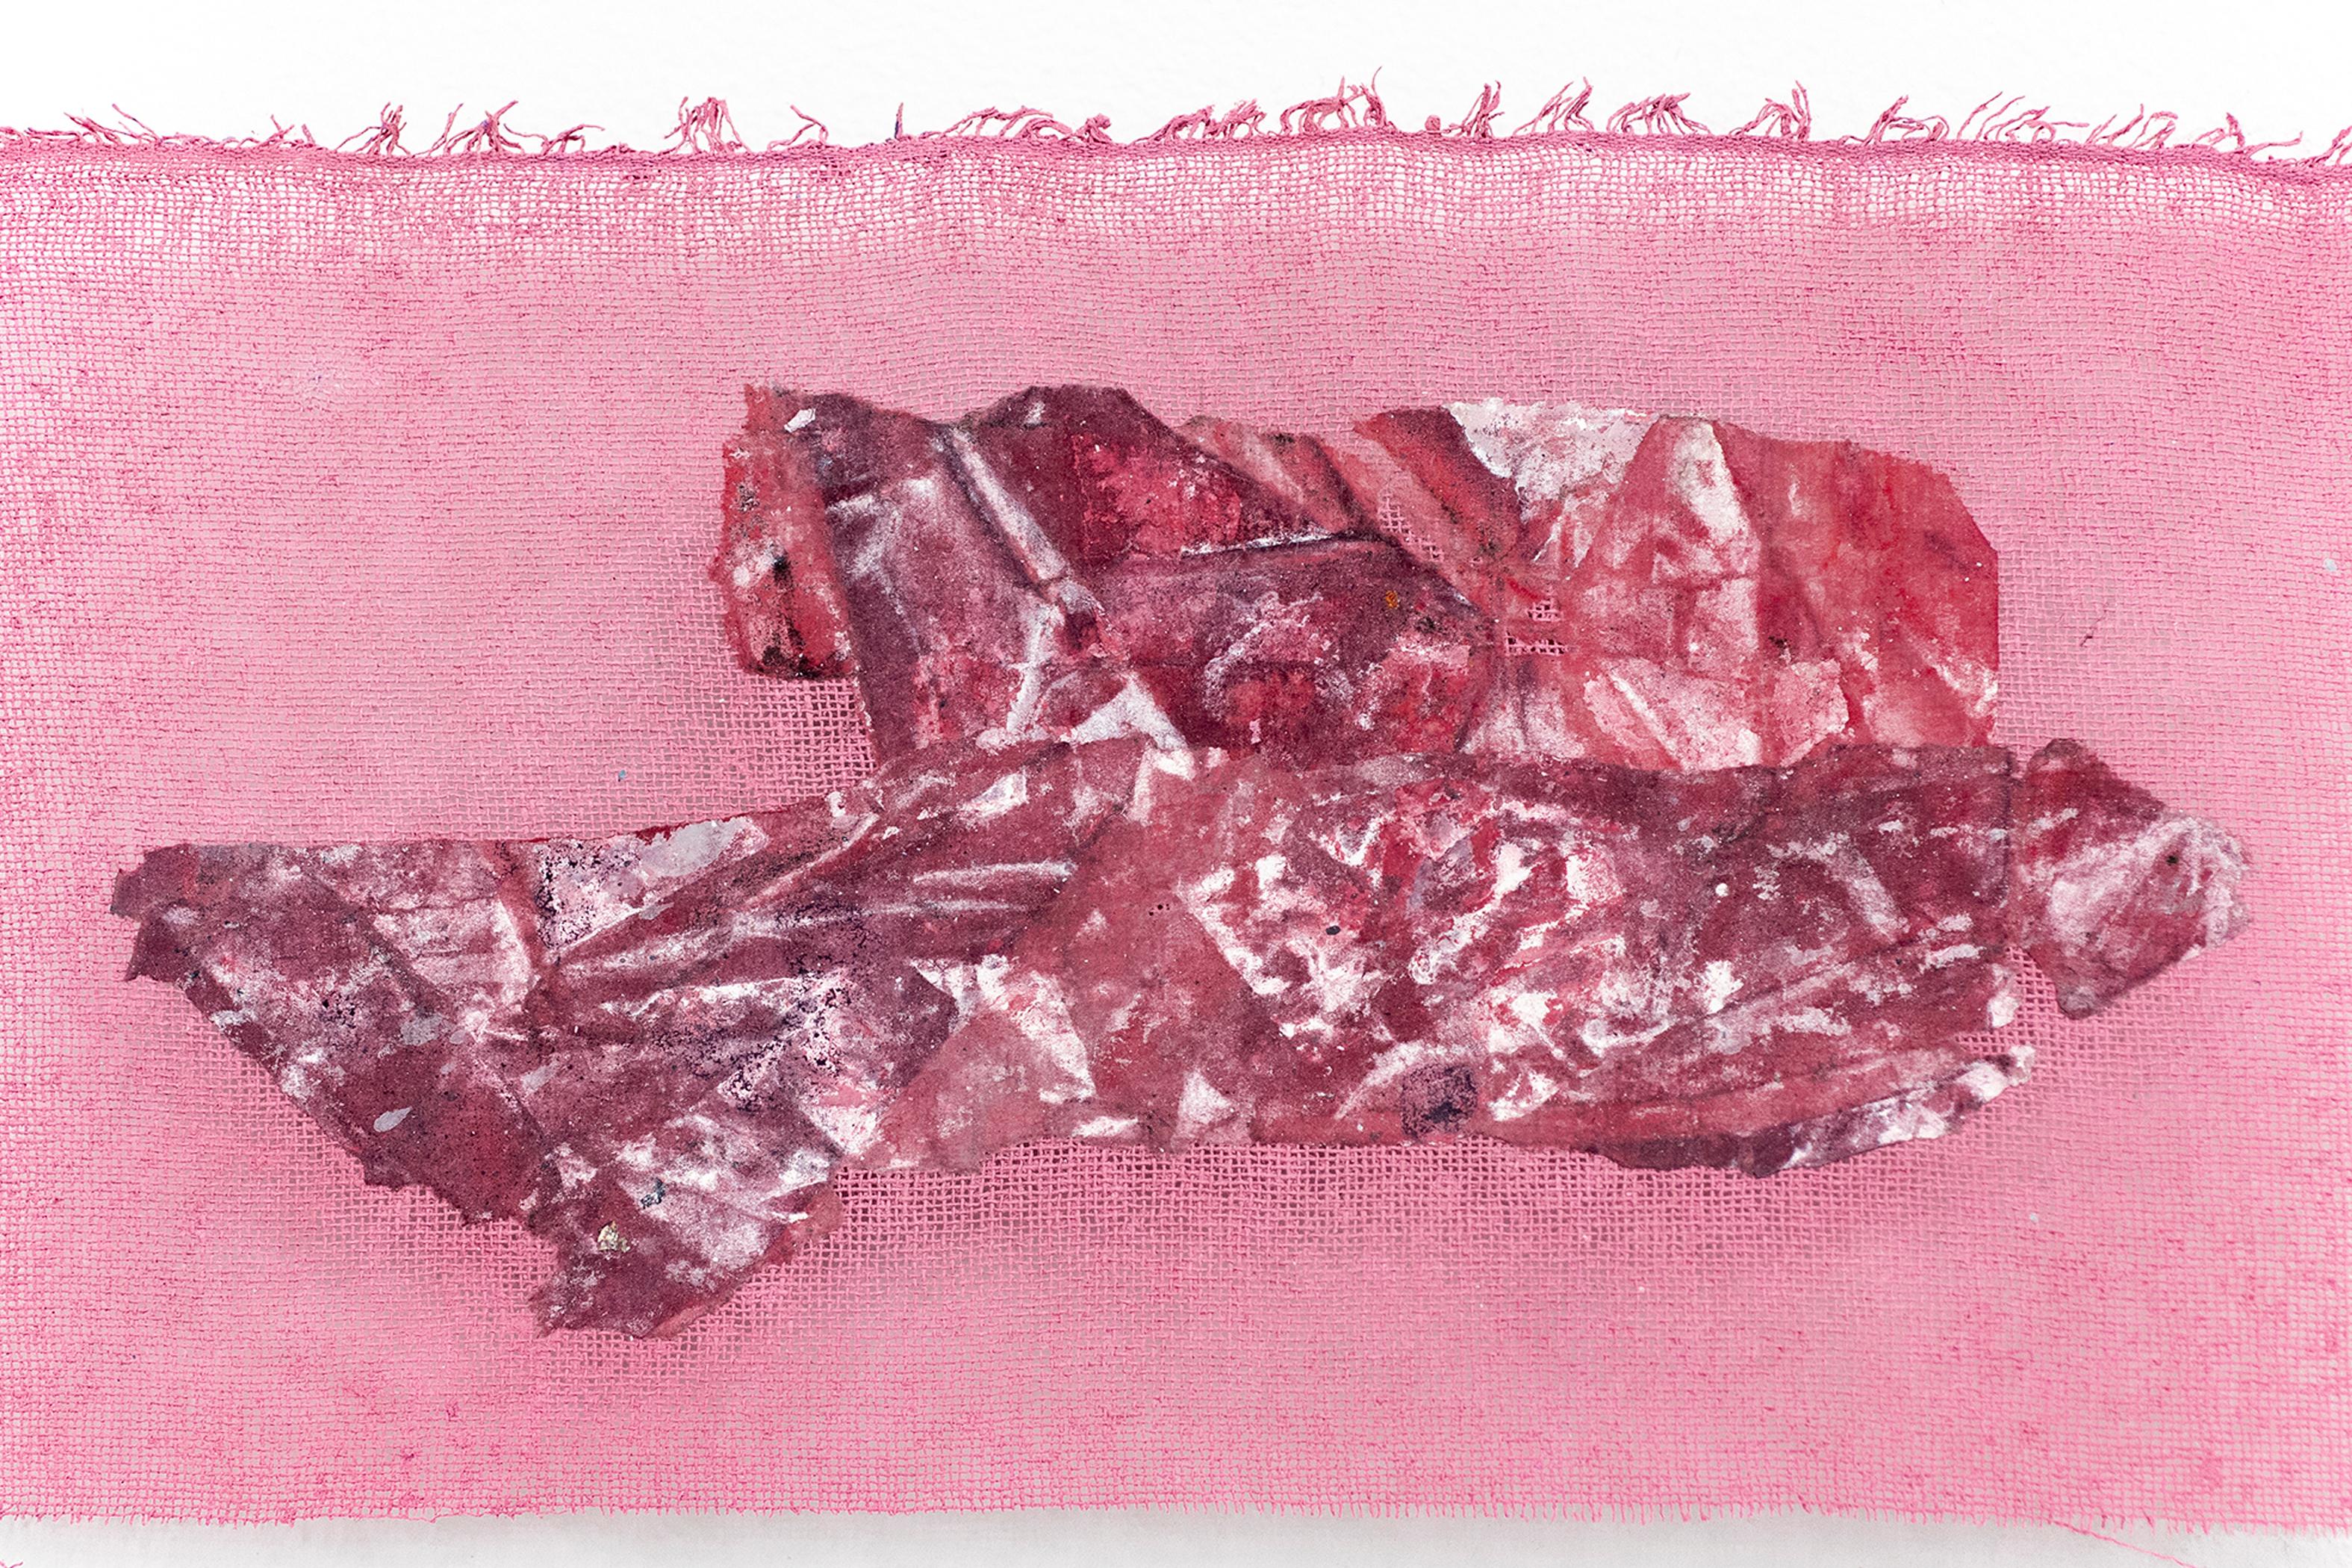 Mulberry paper and acrylic on gauze

Xinyi Liu is an interdisciplinary artist based in New York and Beijing. She works with materials that resonate with the thin and silky quality of human skin. She creates works that metaphorically mimic the